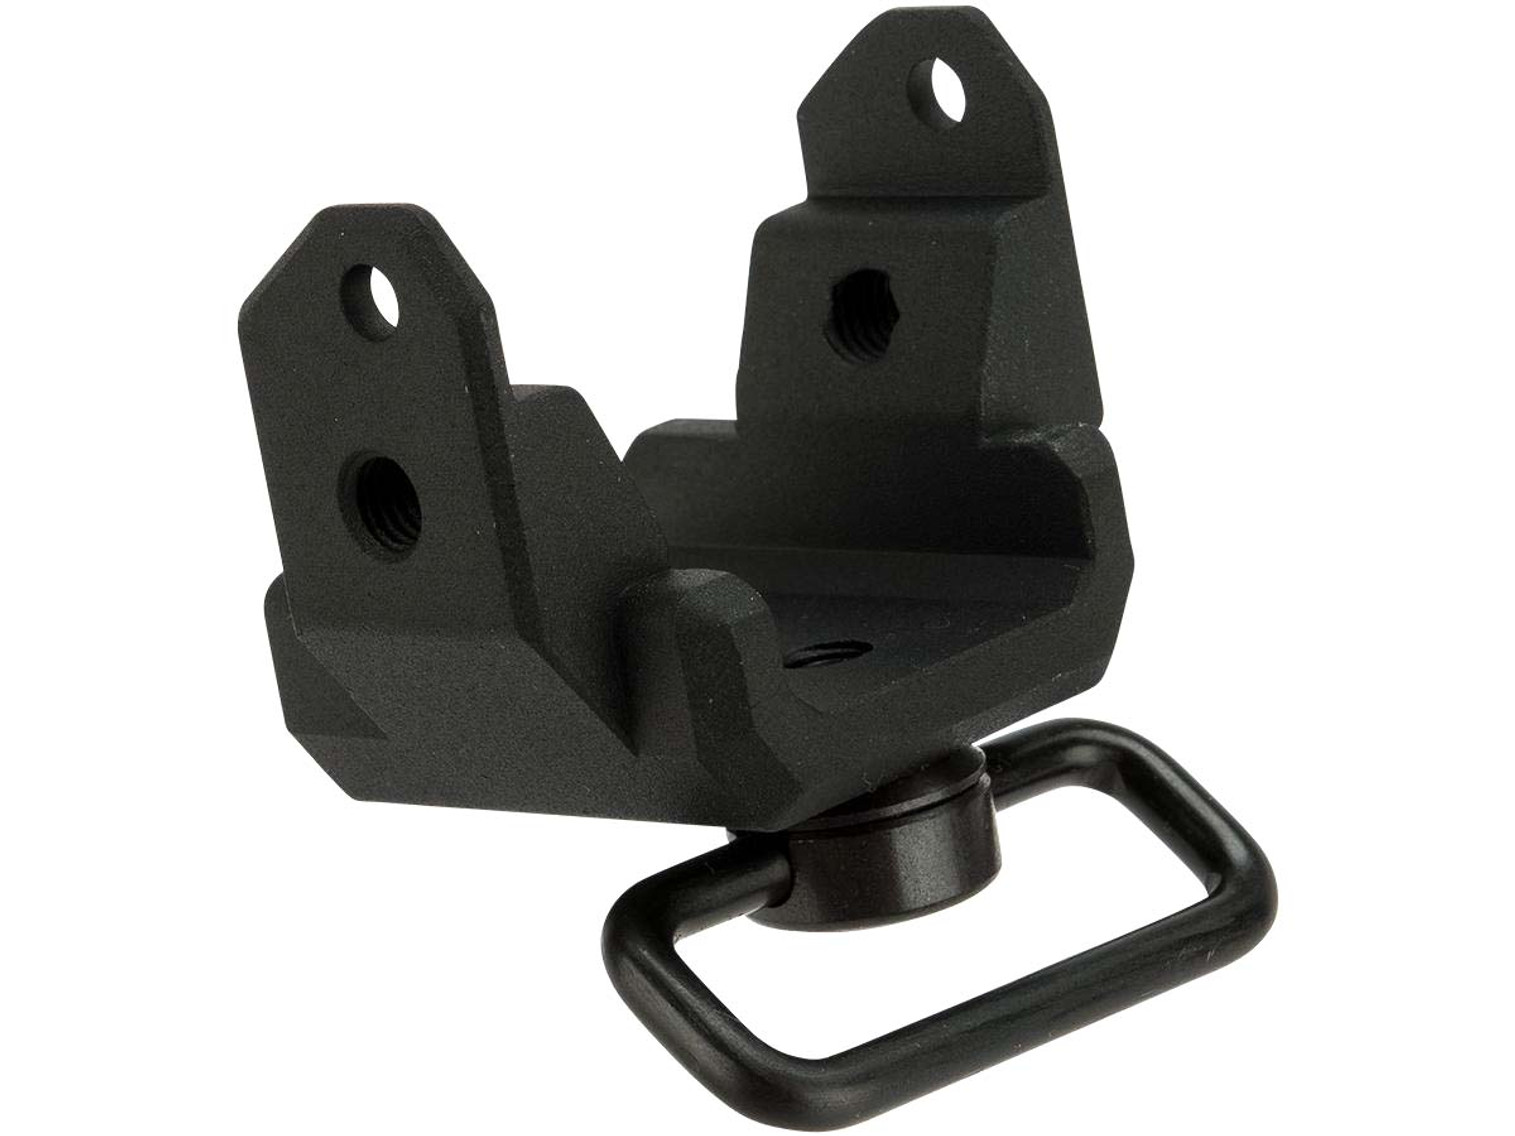 Laylax / Nine Ball Sling Swivel for Tokyo Marui MP7A1 Airsoft AEGs